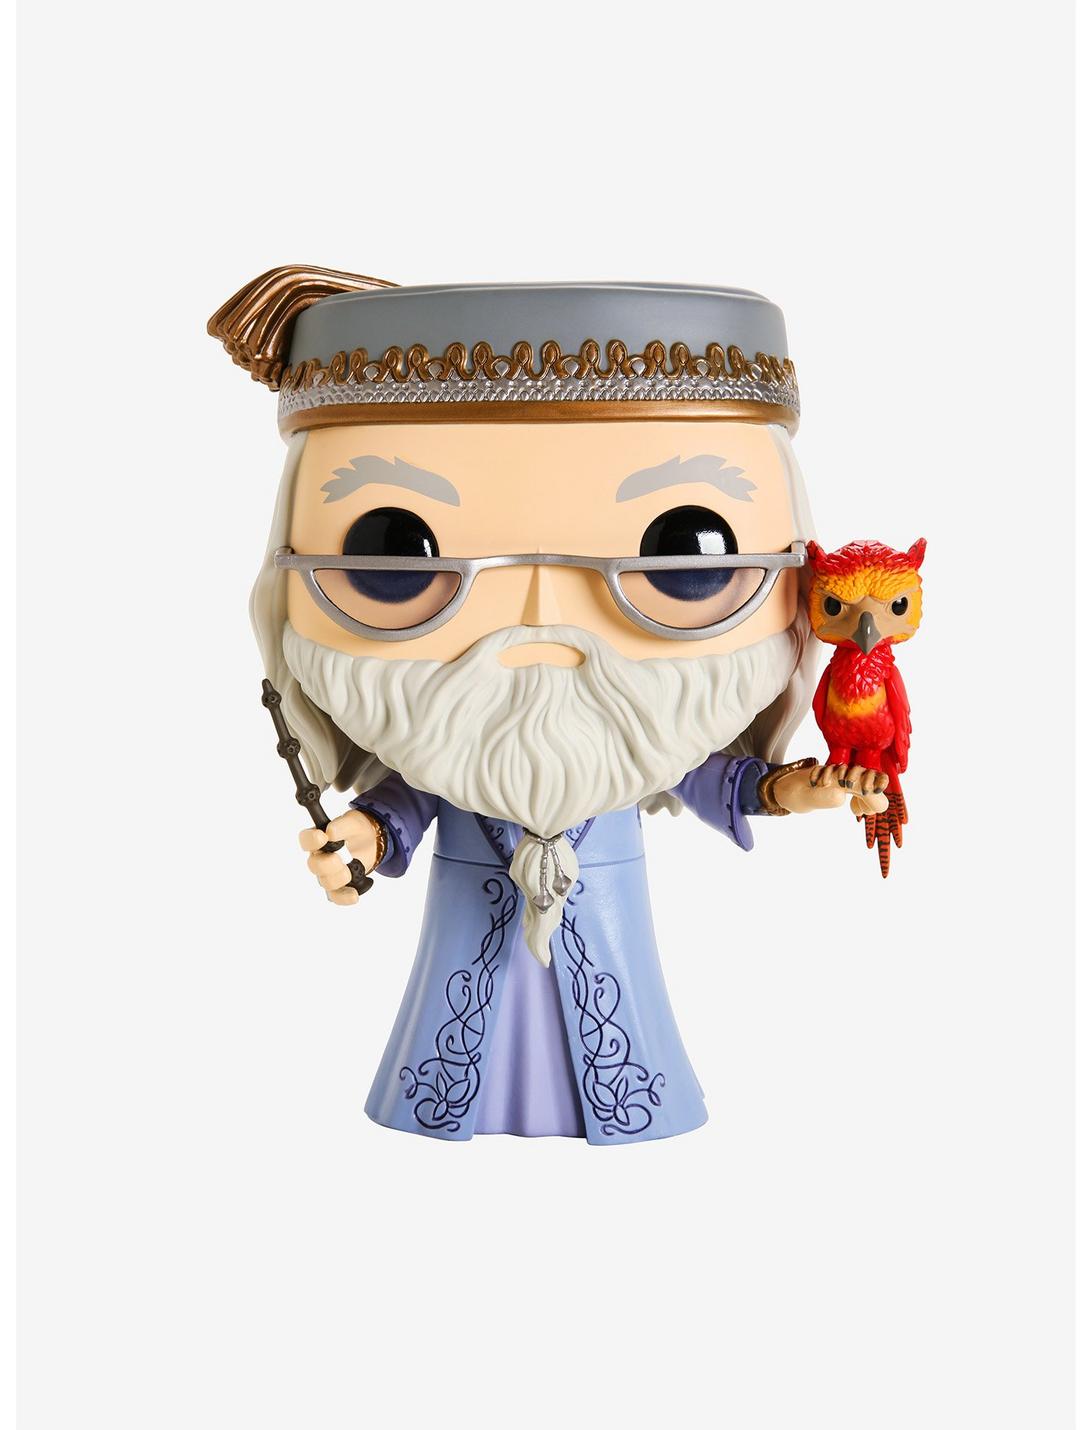 Trading Card Vinyl Figure Bundled with 1 Official H.P 110-48038 Albus Dumbledore w/ Fawkes: 10in Funk o Pop 